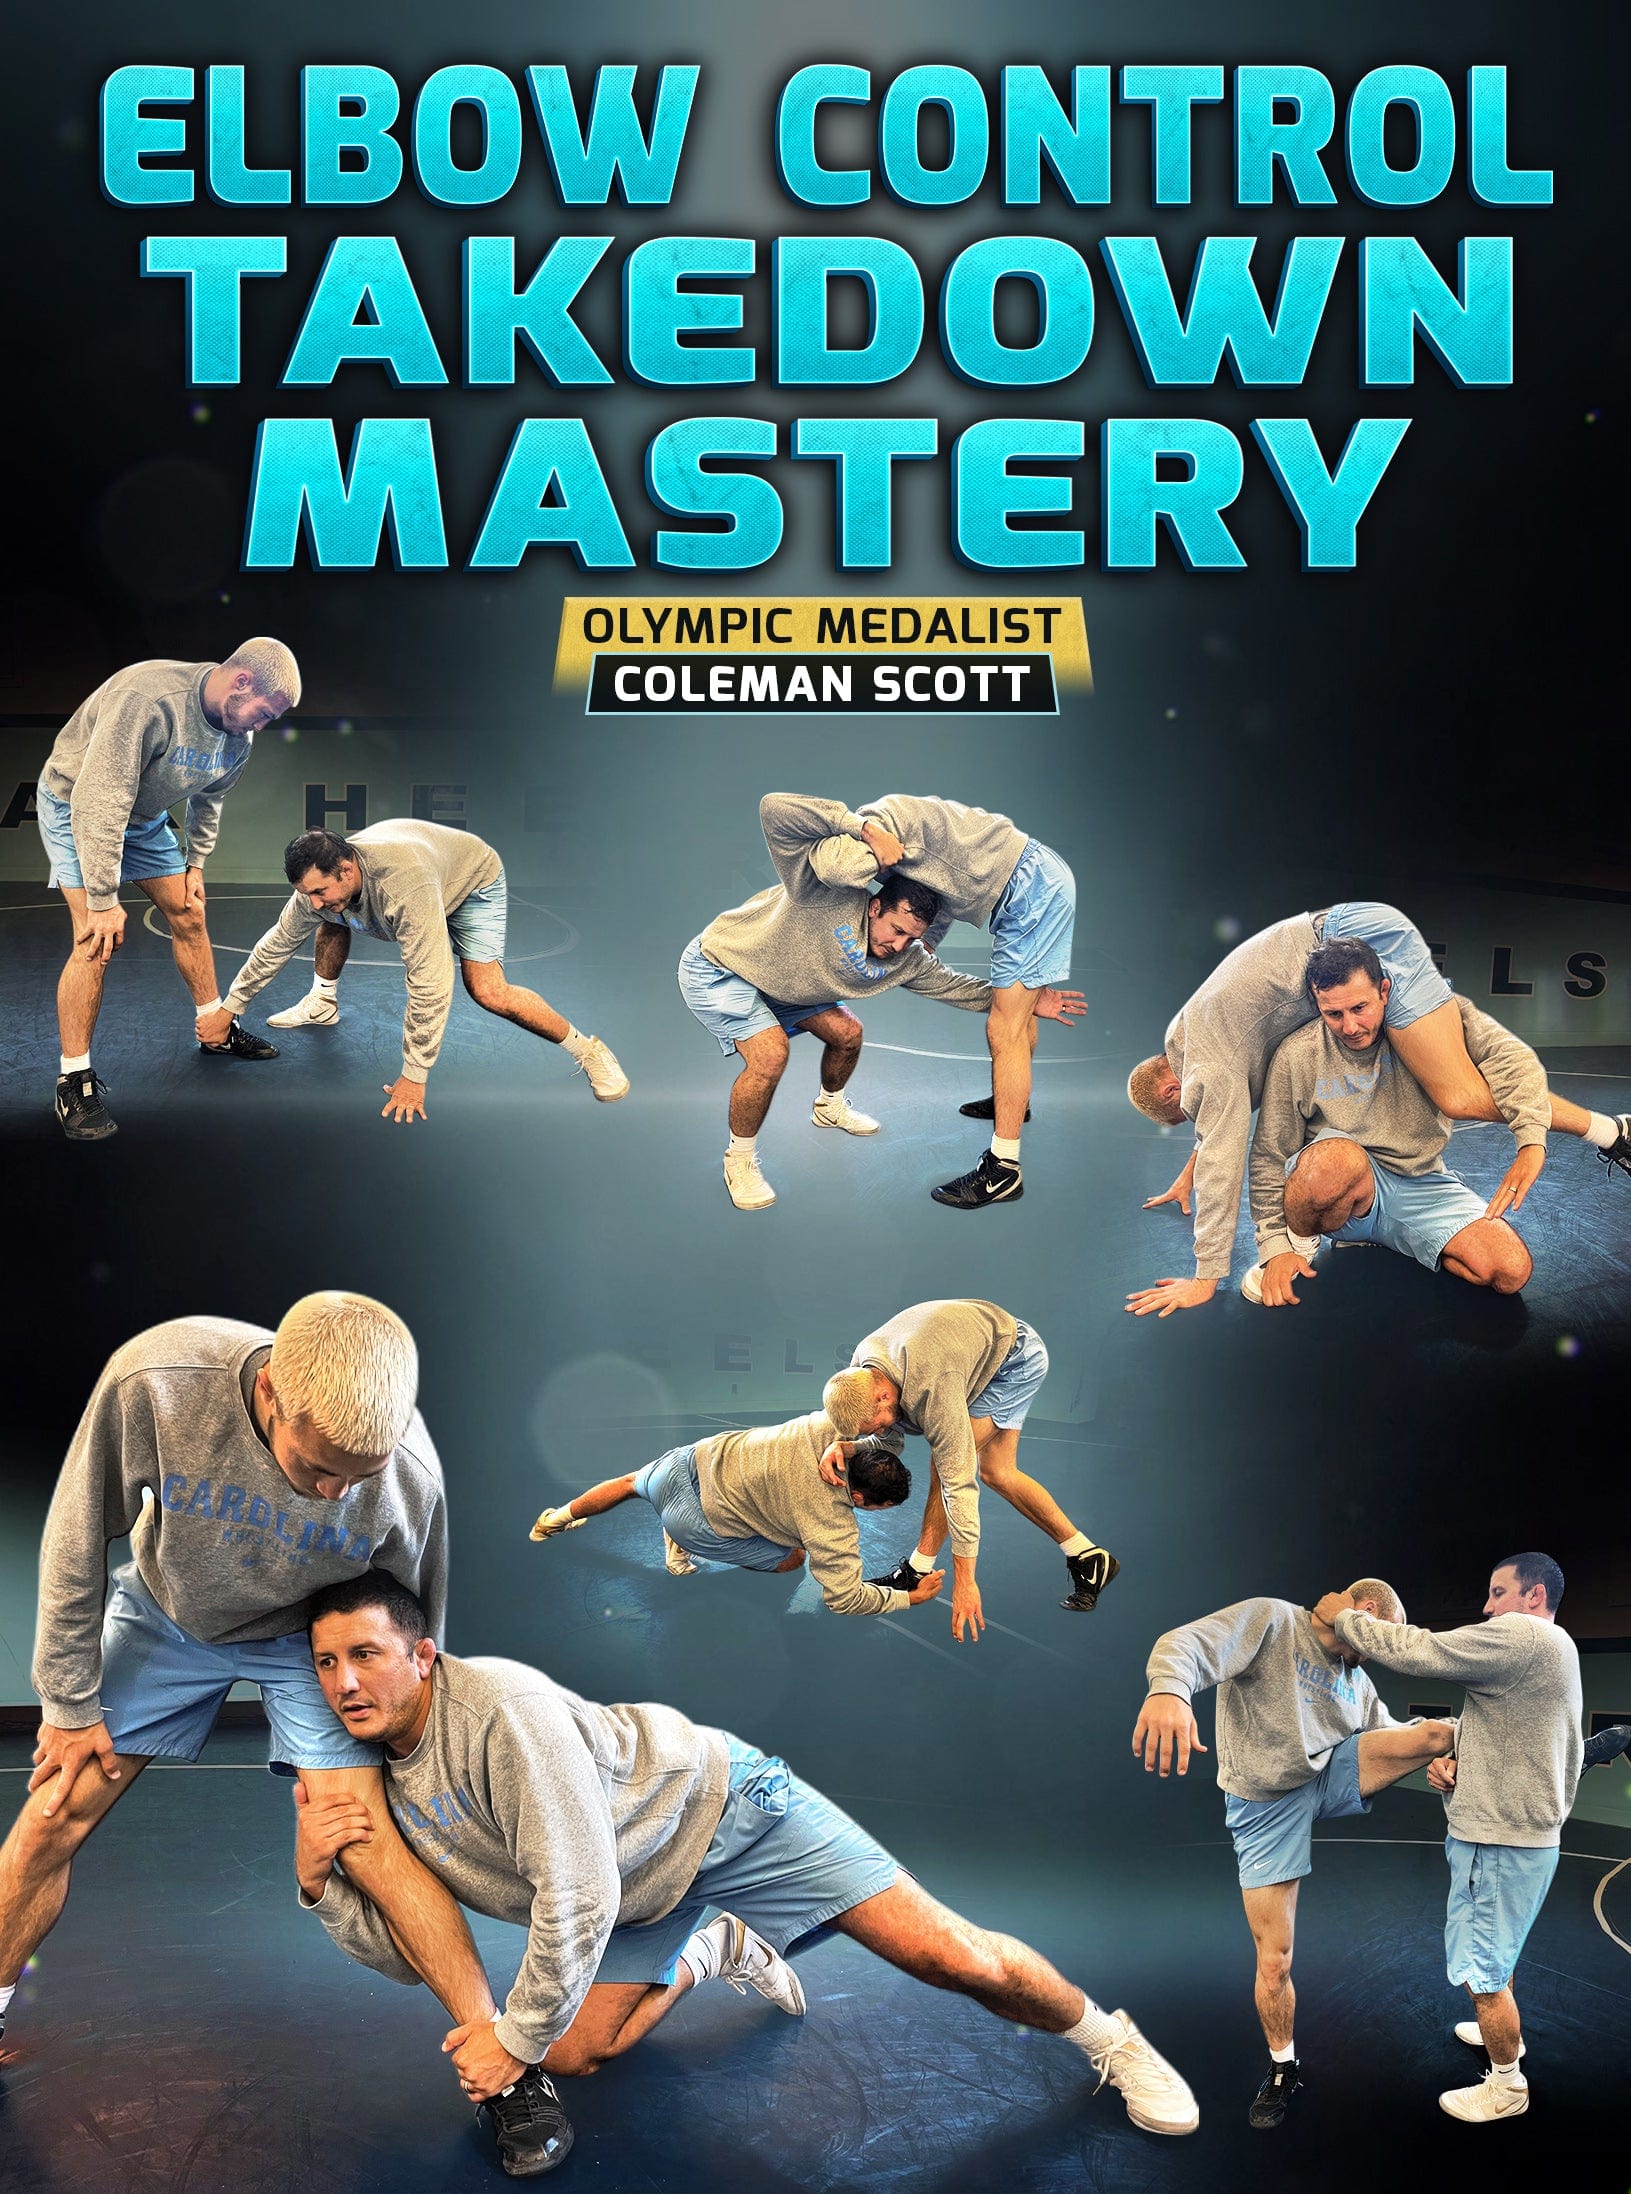 Elbow Control Takedown Mastery by Coleman Scott - Fanatic Wrestling